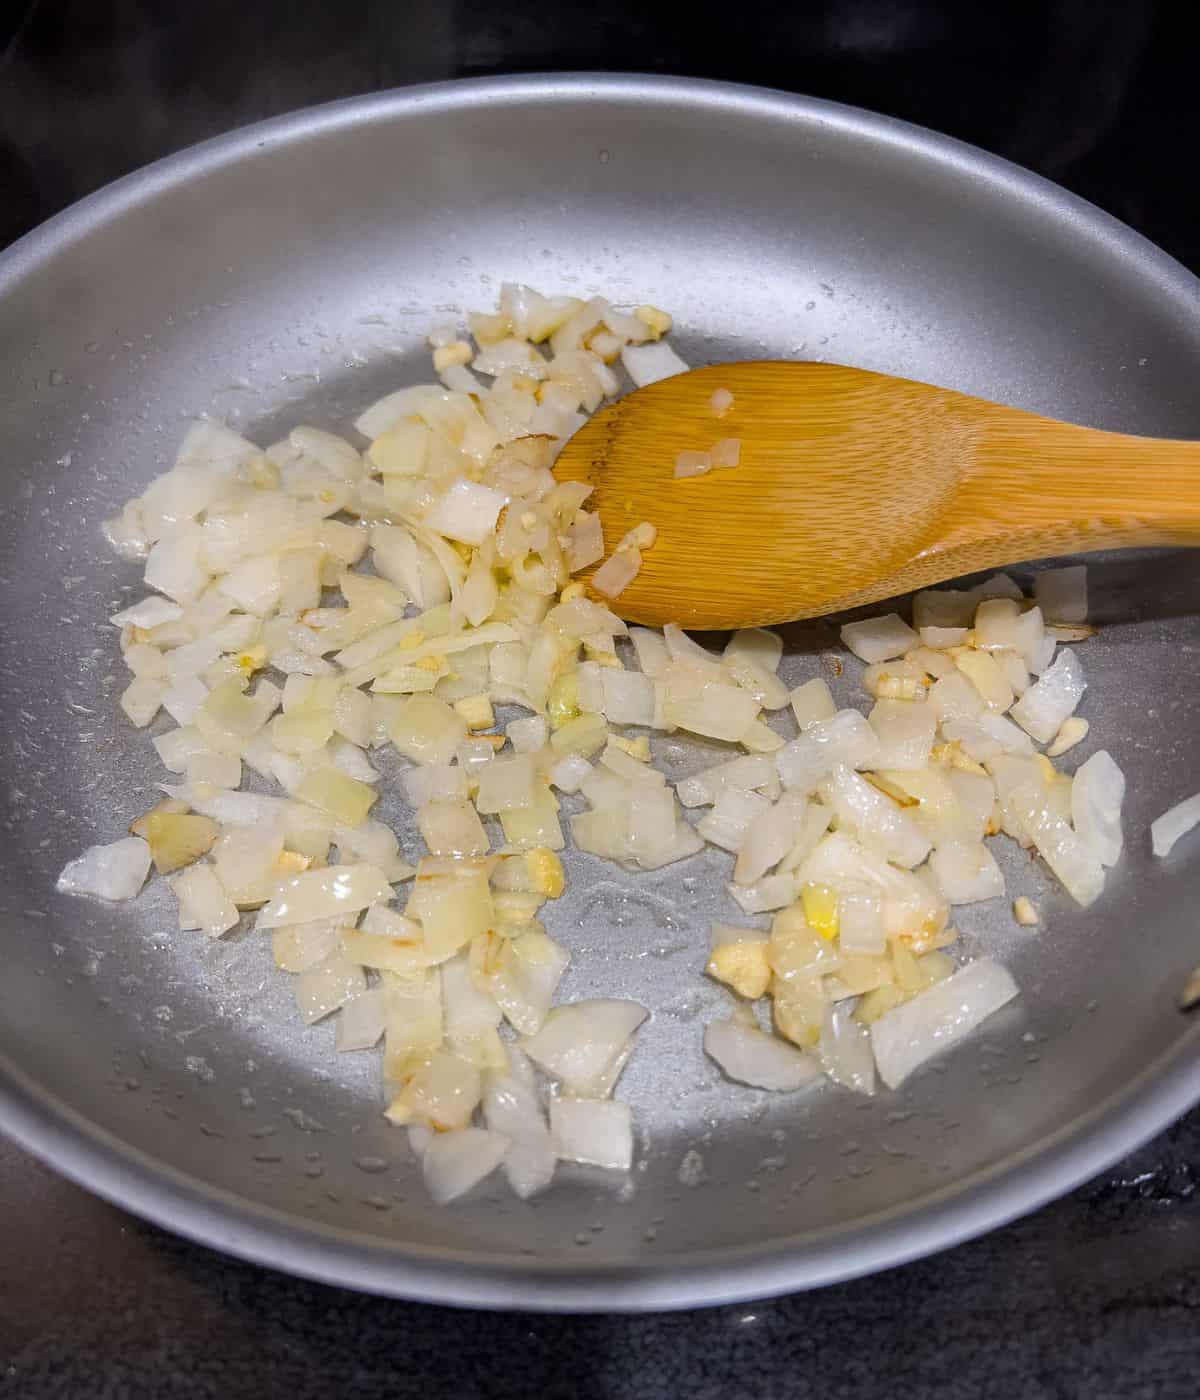 Cooking onion and garlic.